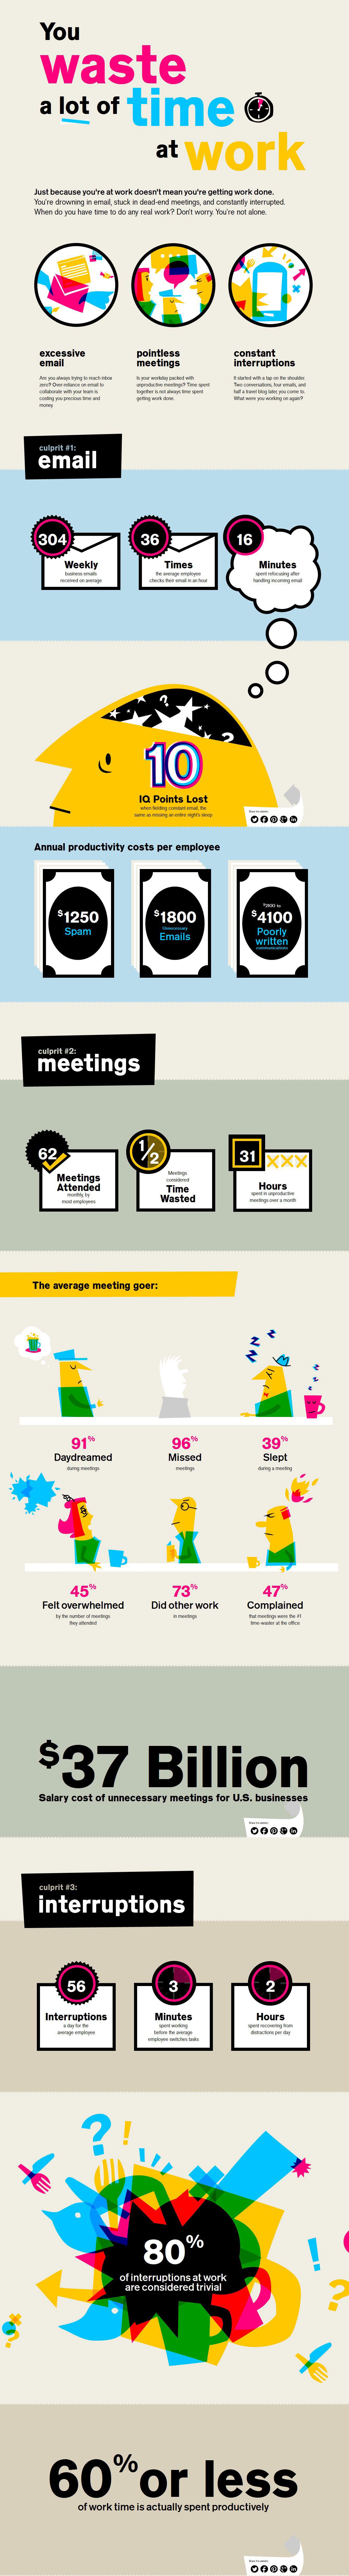 waste-time-at-work-infographic